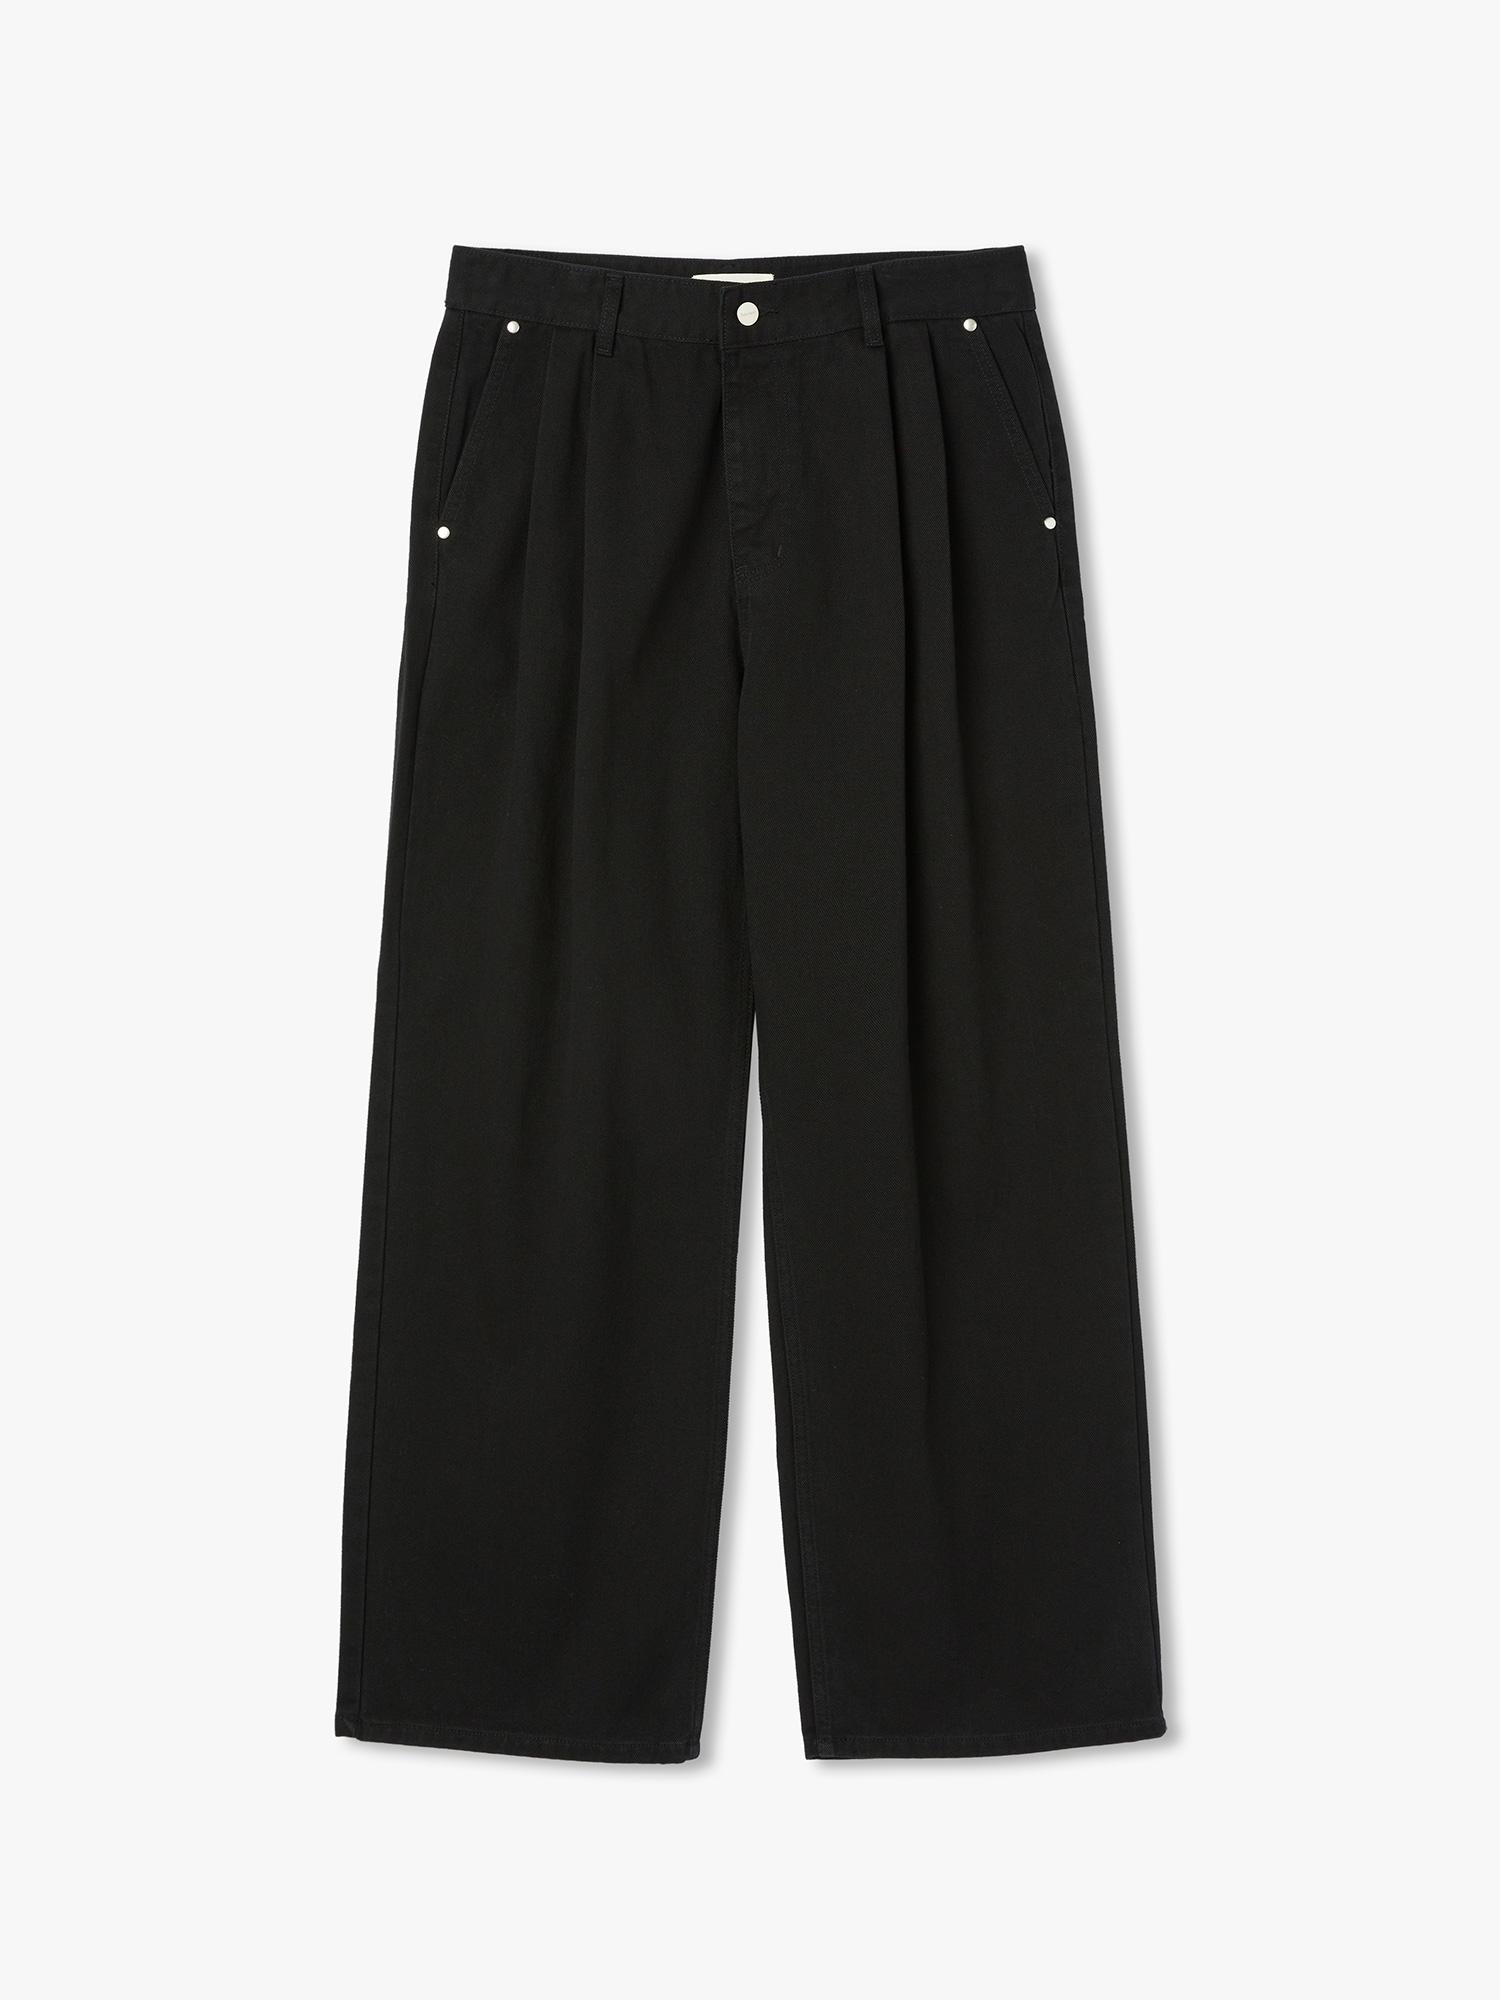 French Two Tuck Chino Pants (Black)